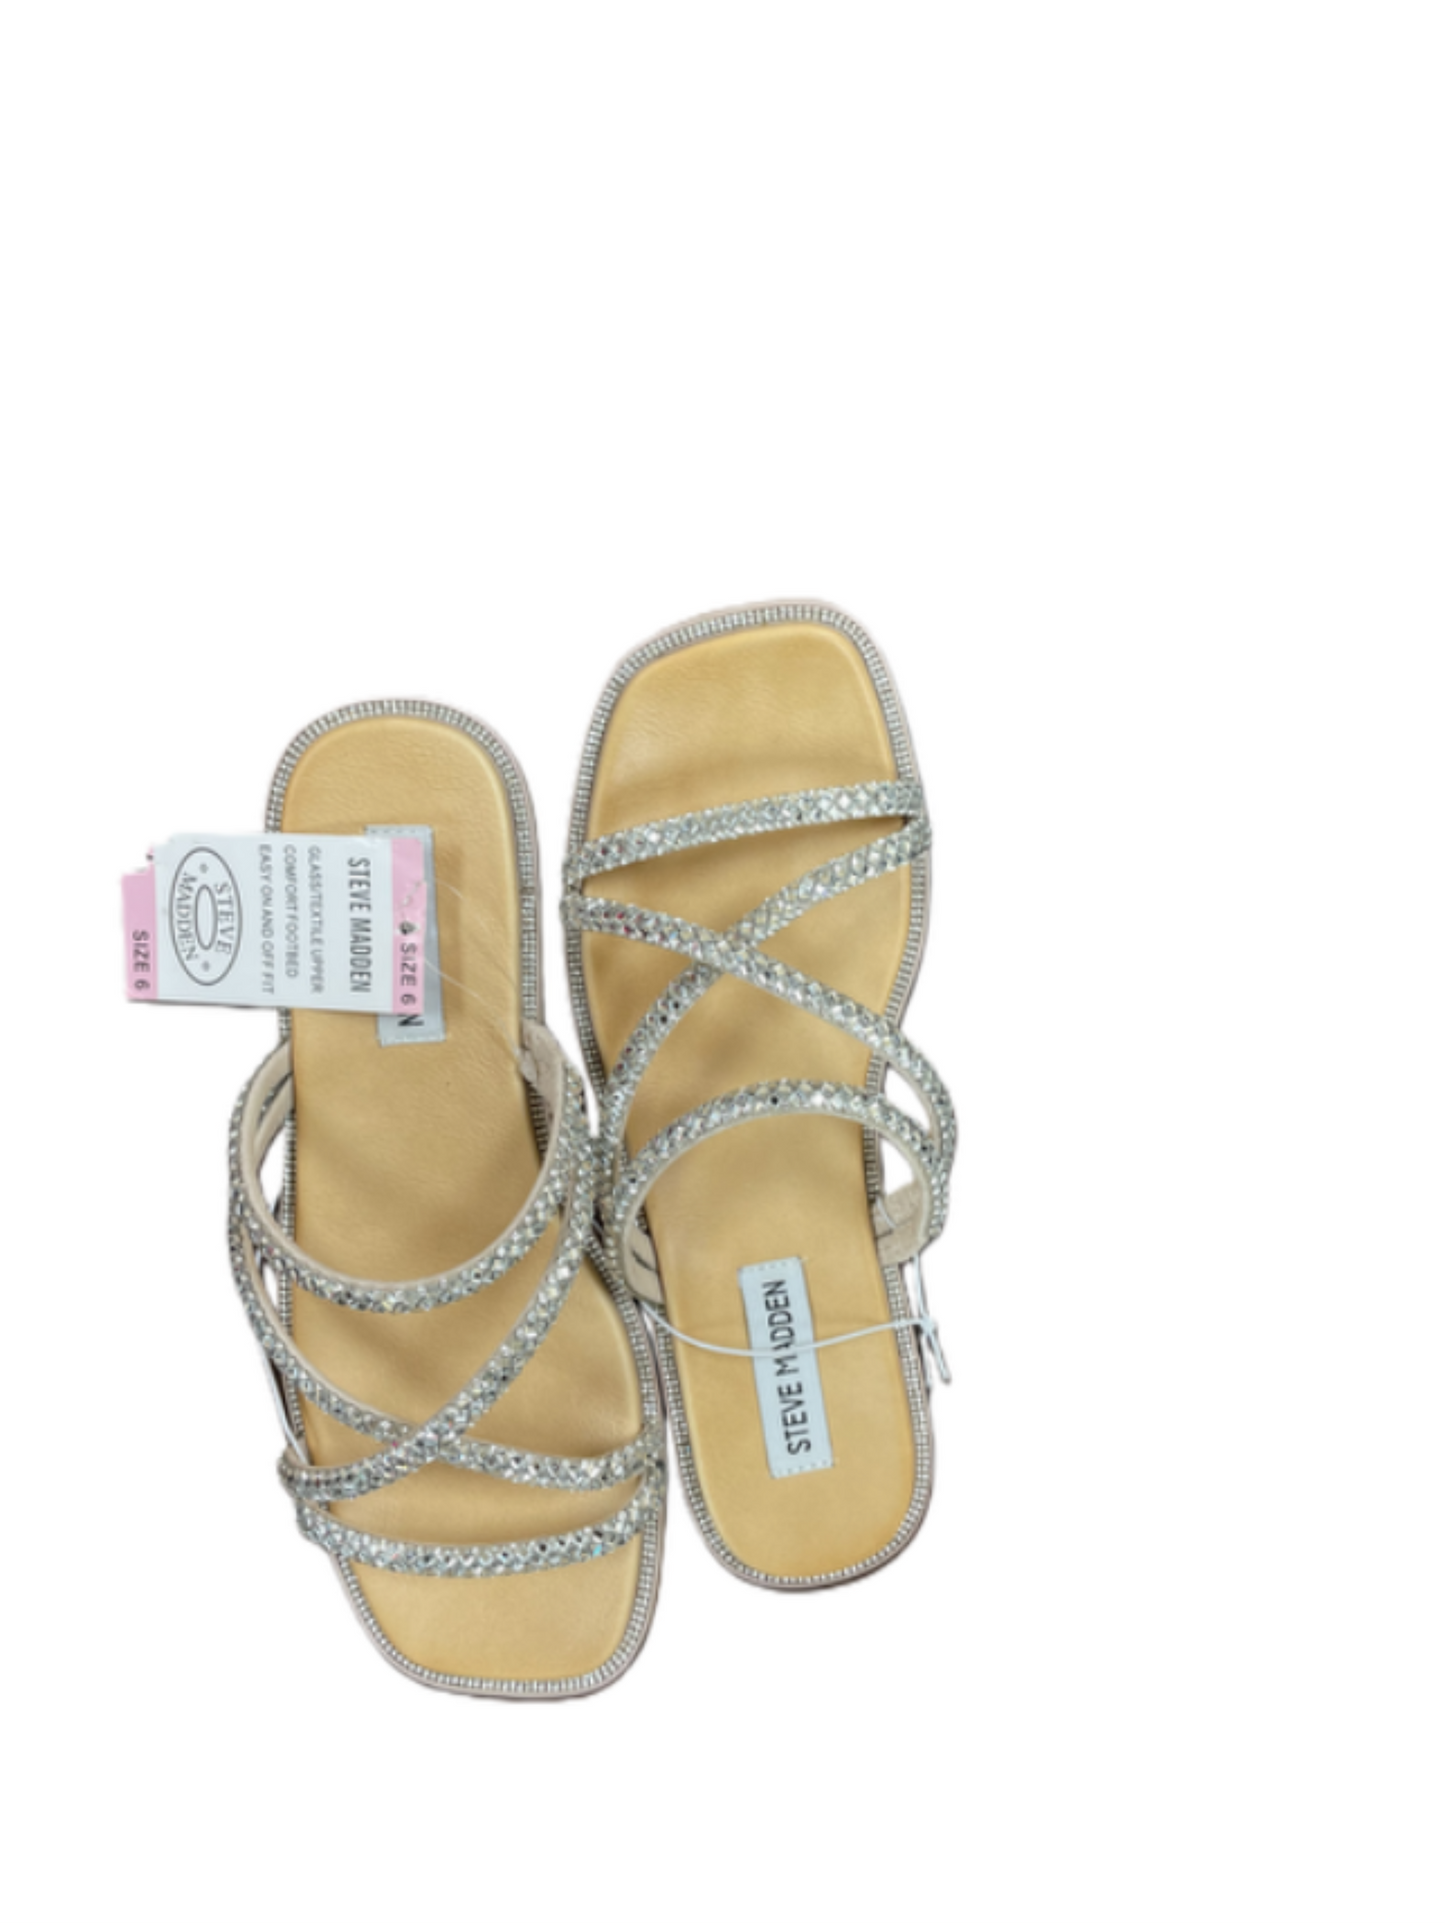 Sandals Flats By Steve Madden  Size: 6